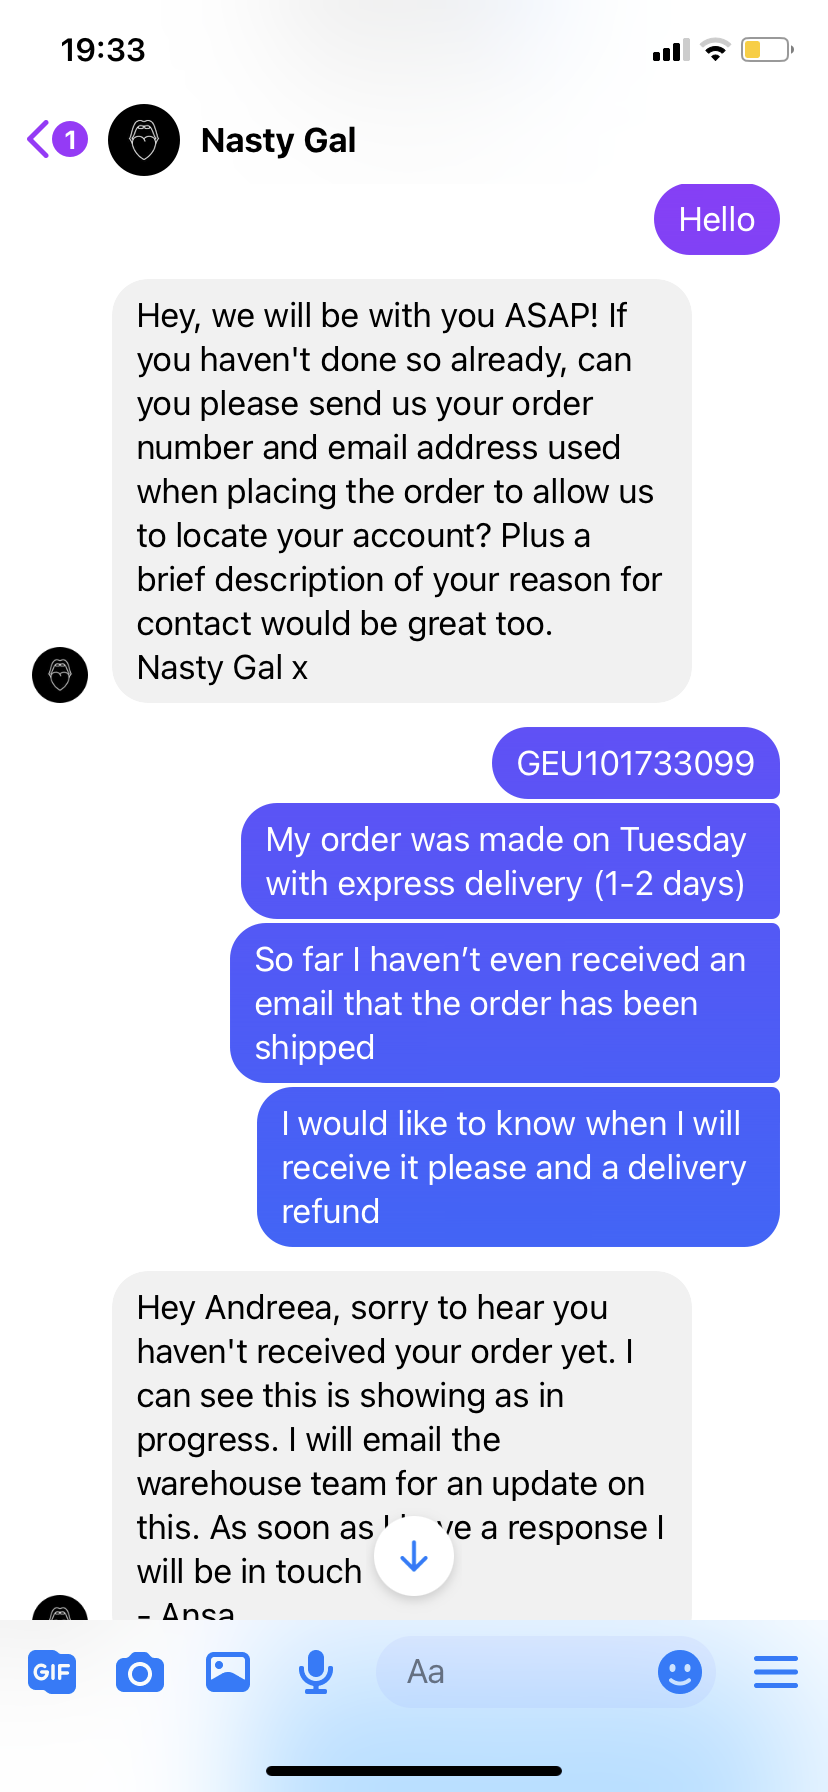 Nasty Gal complaint I paid €177 (€13 express delivery) to not receive my package days later